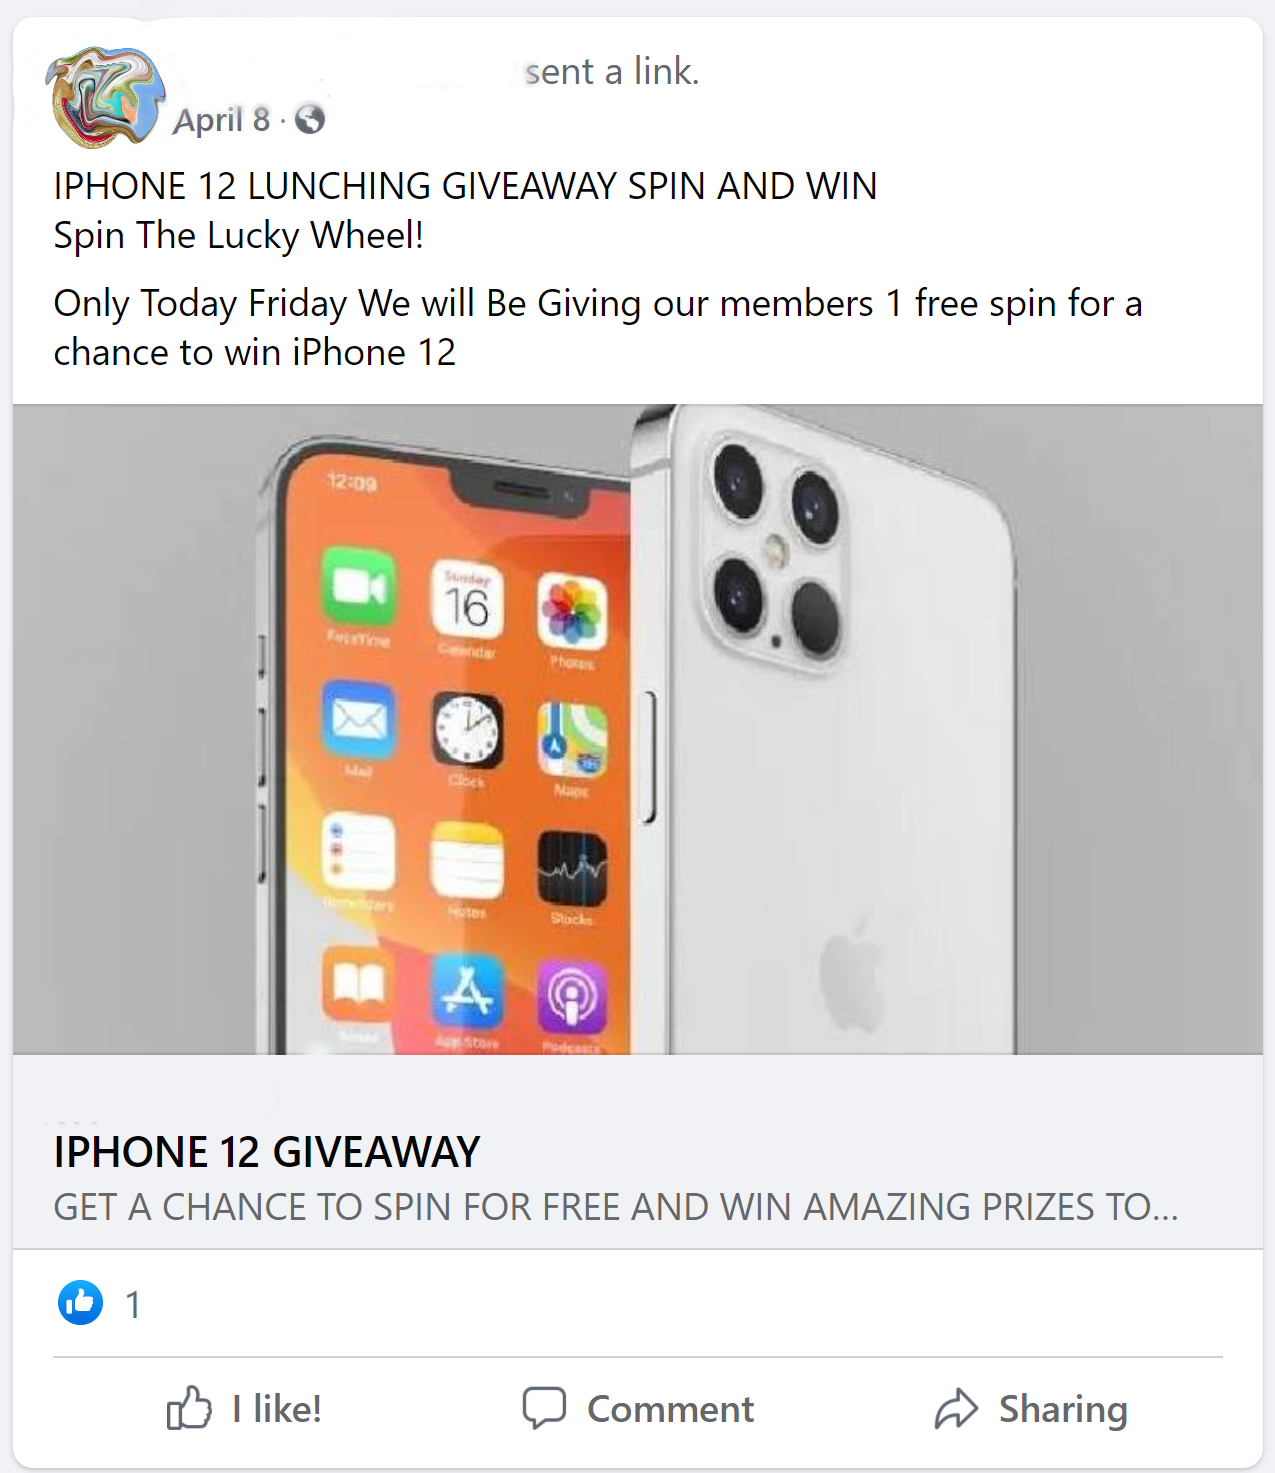 Sweepstakes shared via Facebook